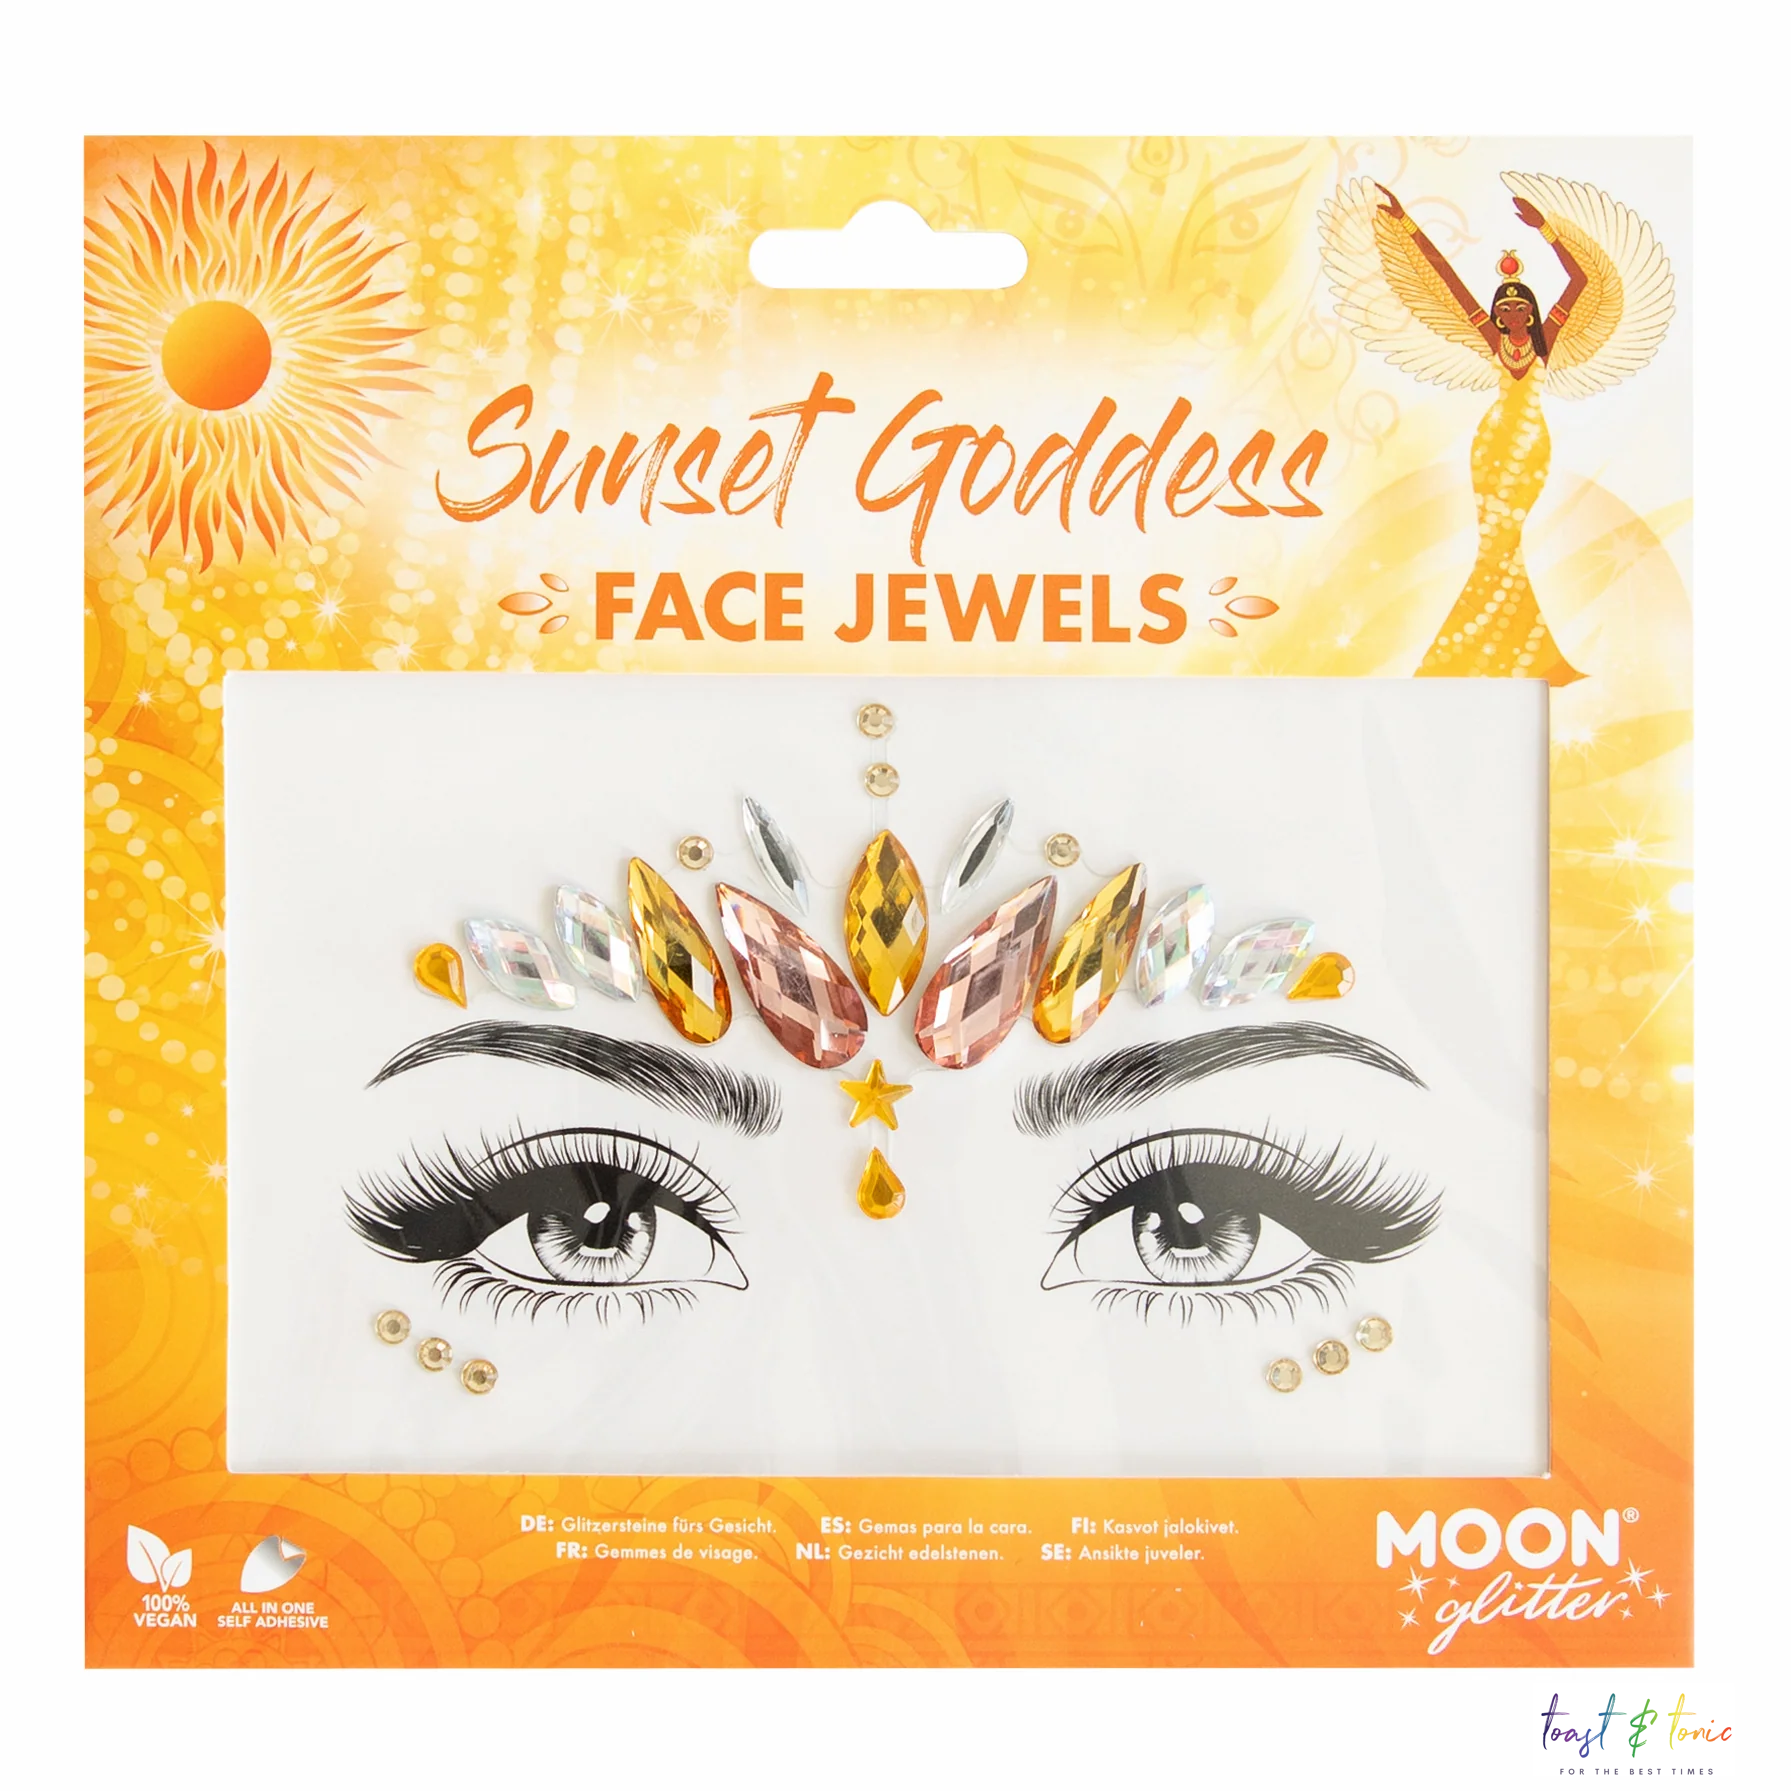 Face Jewels, Face Gems, Sunset Goddess, Gold, Pink, Orange and Clear, Moon Glitter